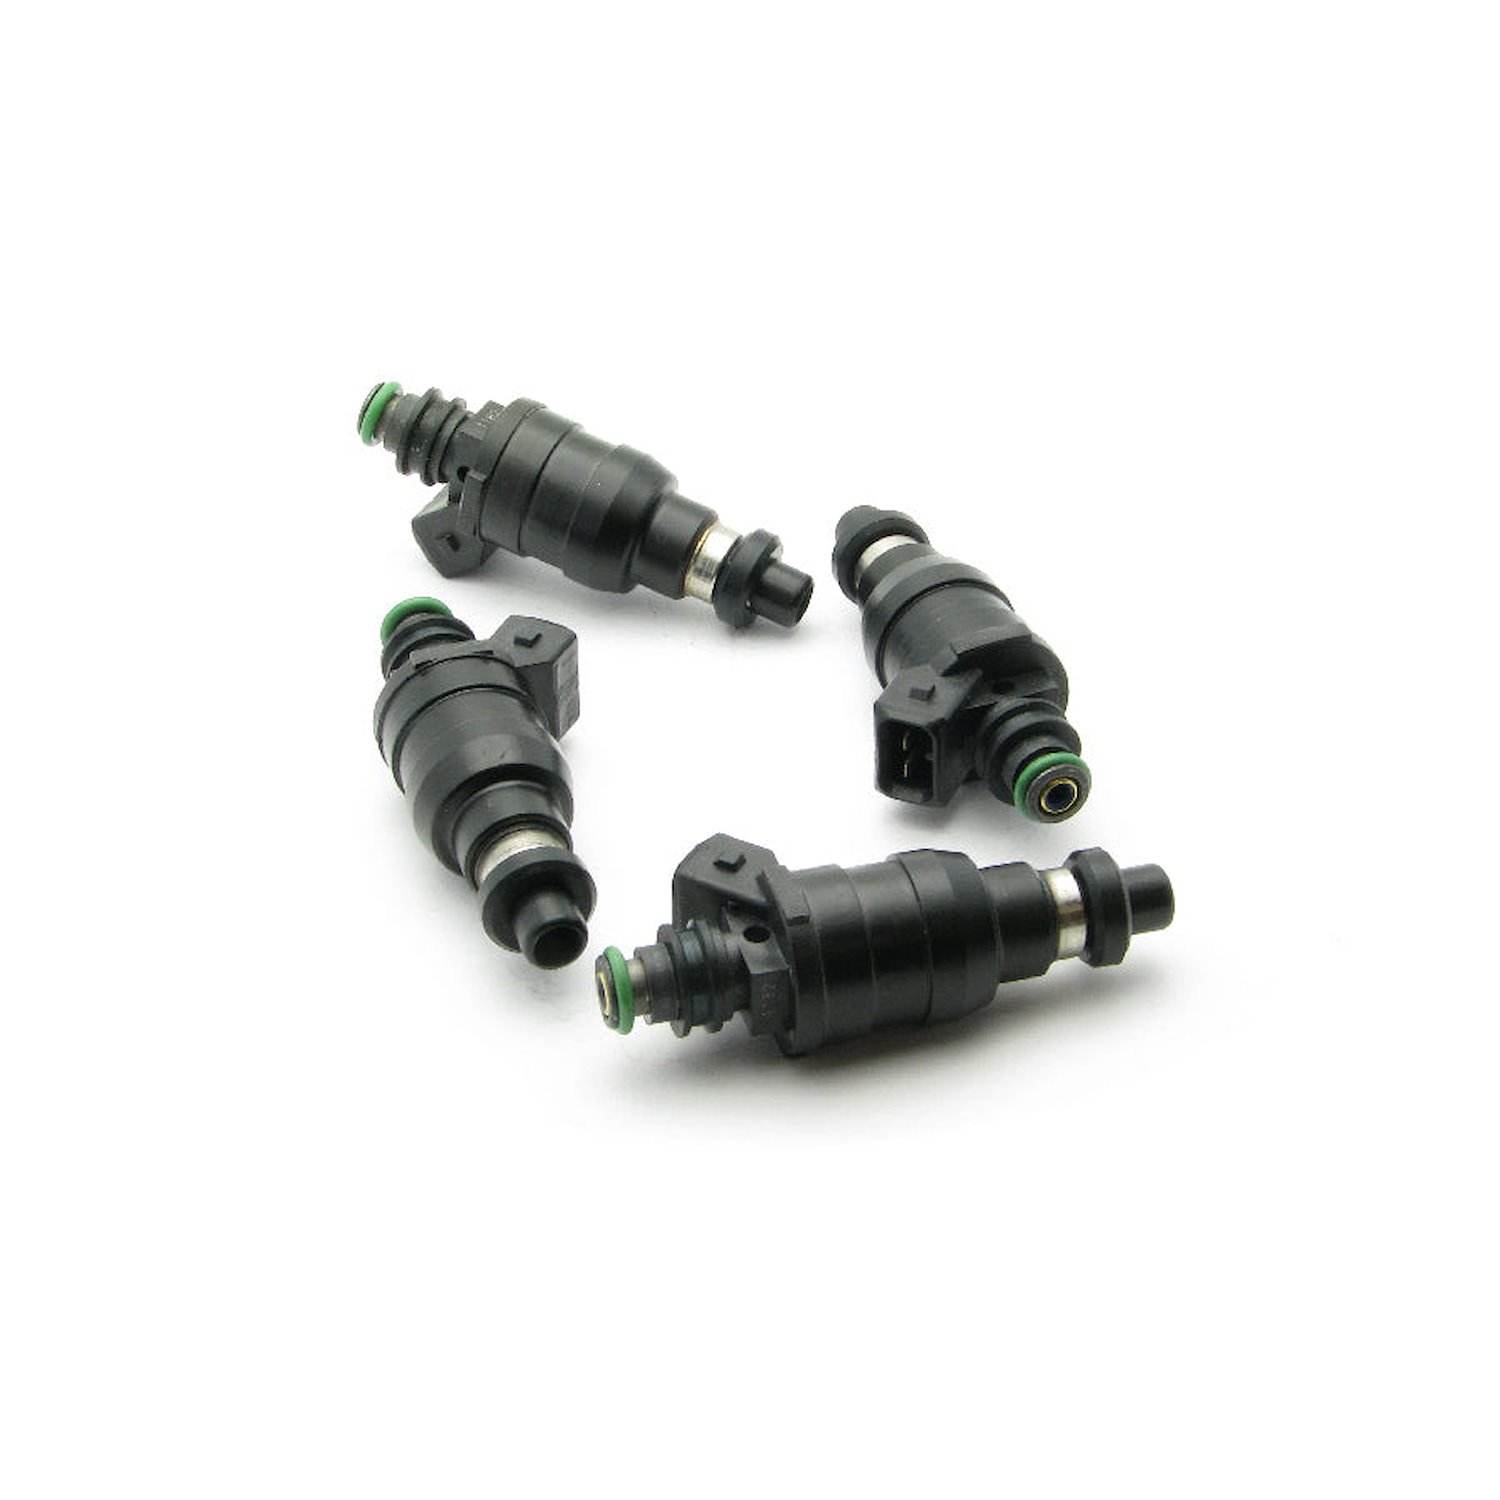 42M0210004  1000cc Low Impedance Injectors for Mitsubishi Eclipse (DSM) 4G63T 95-99 and EVO 8/9 4G63T 03-06